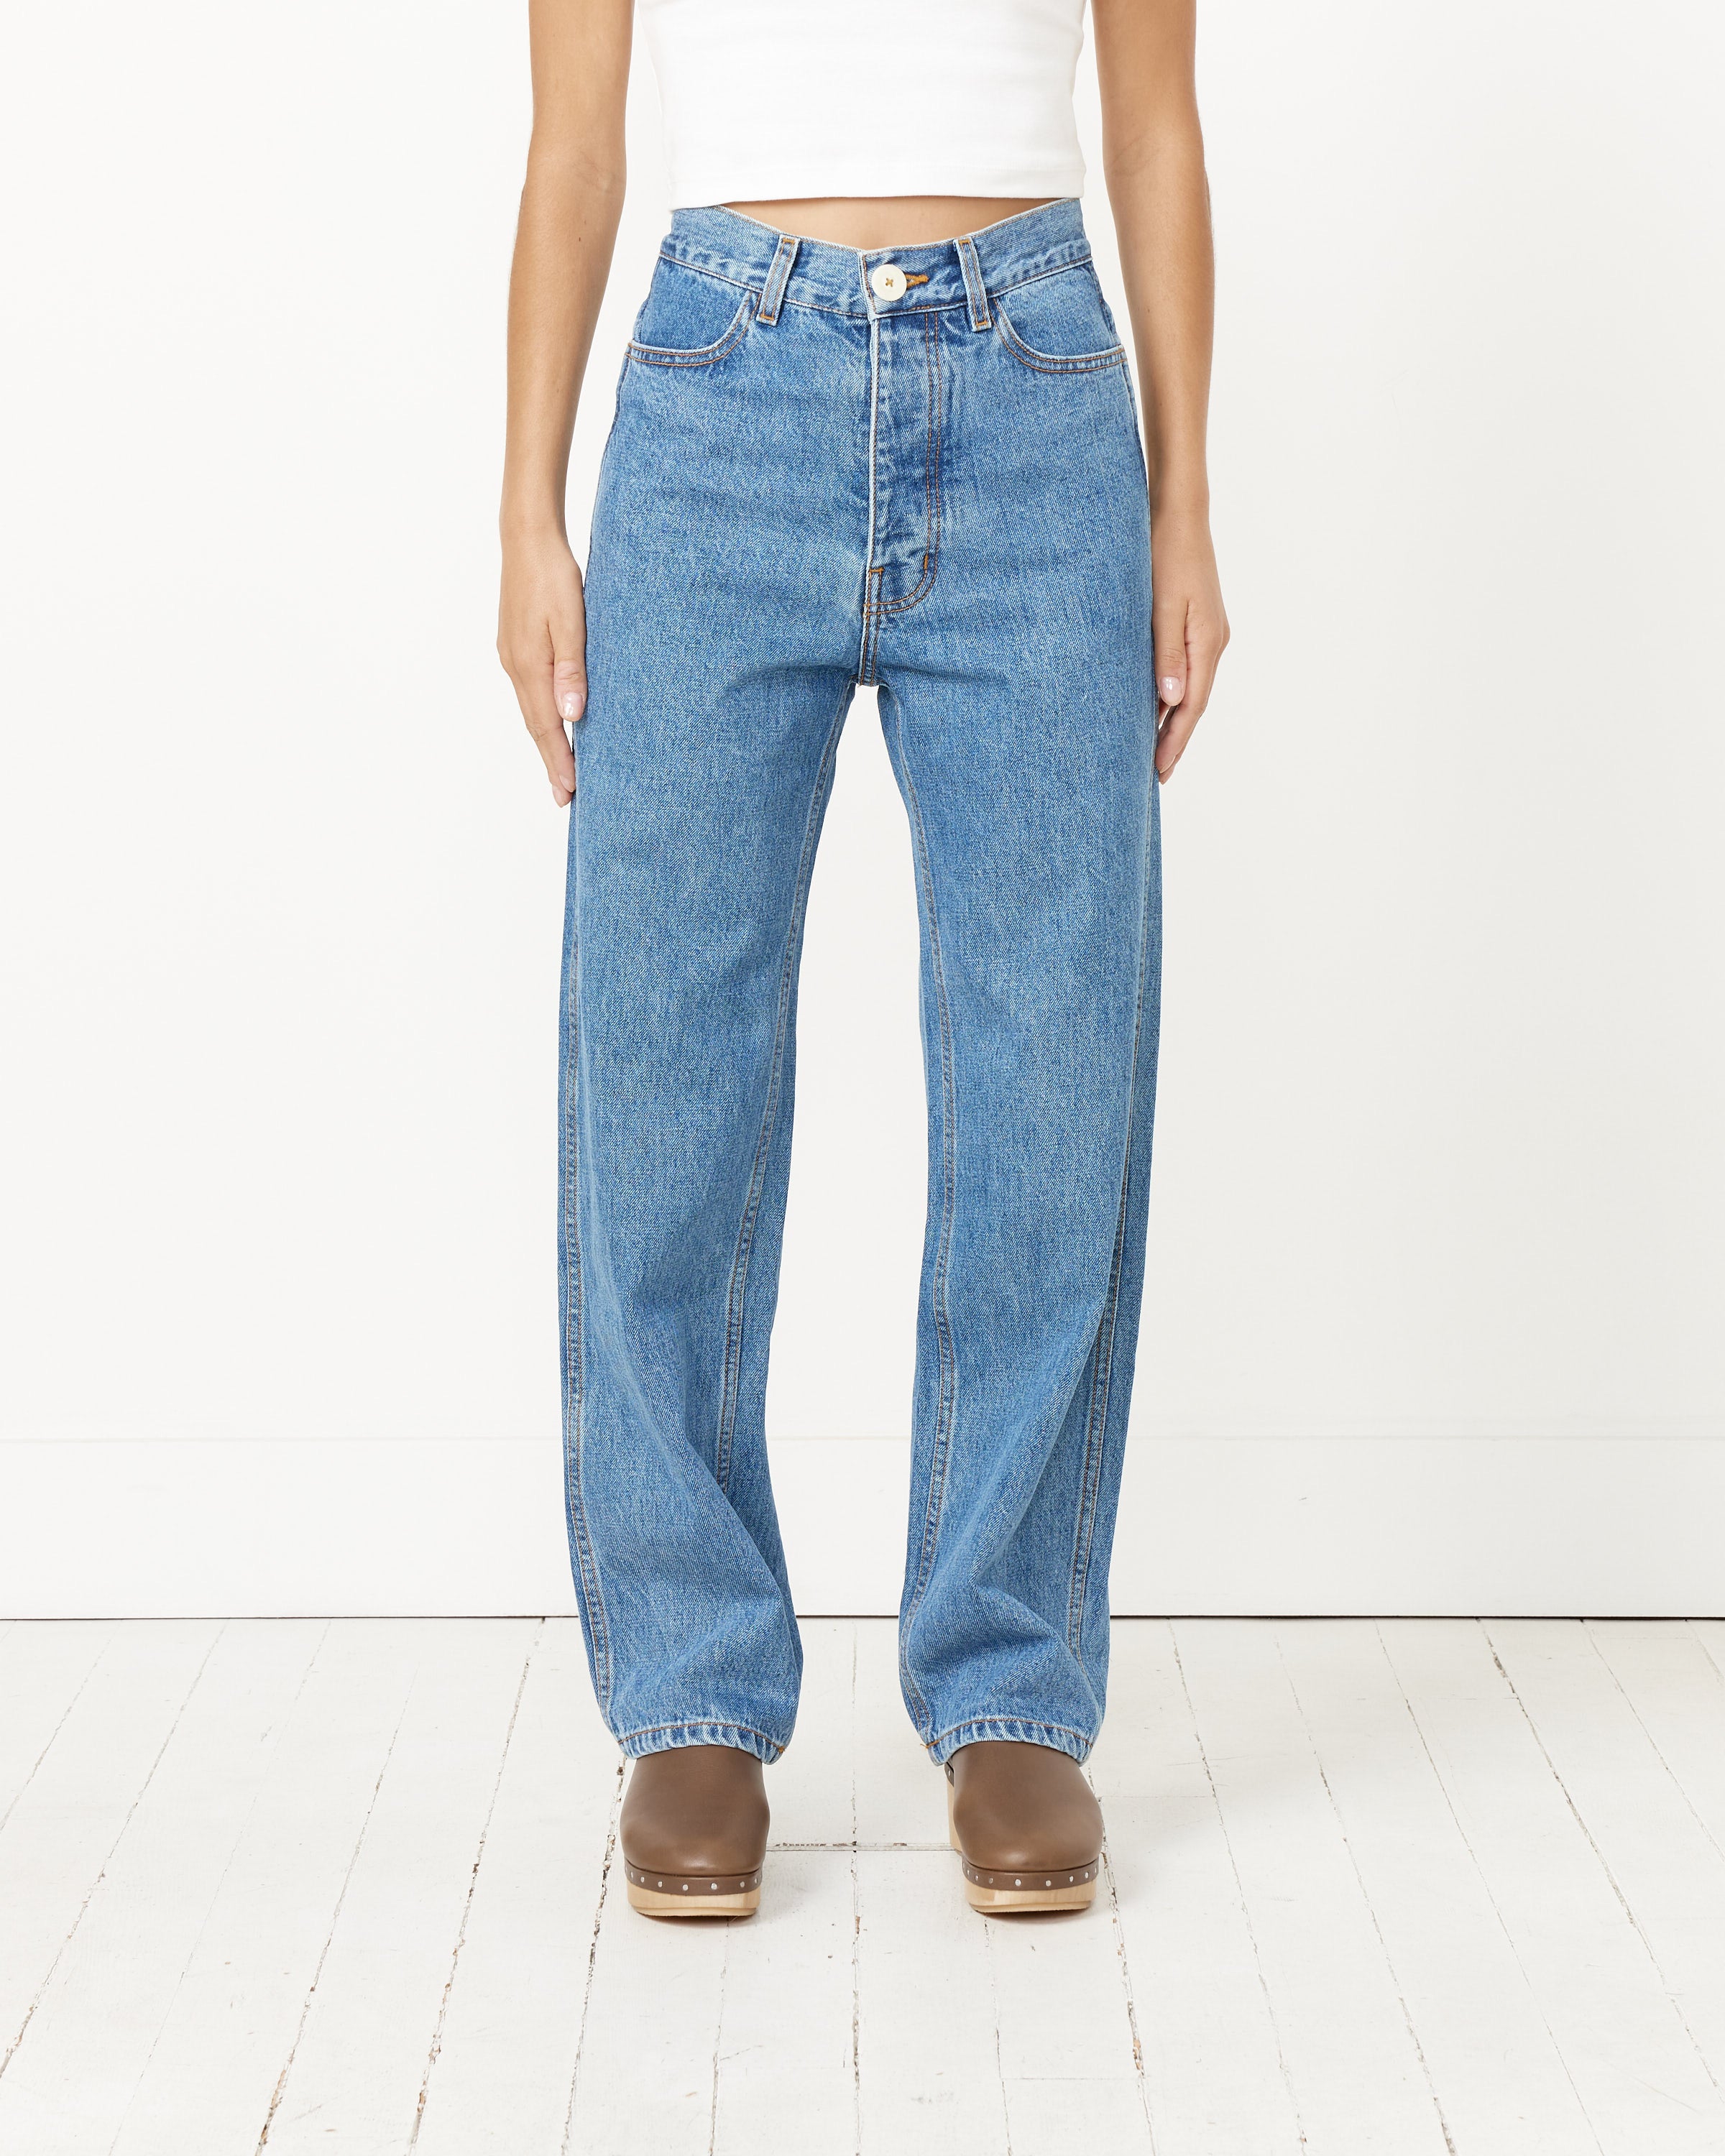 The 225 Pant in Cowboy Blue